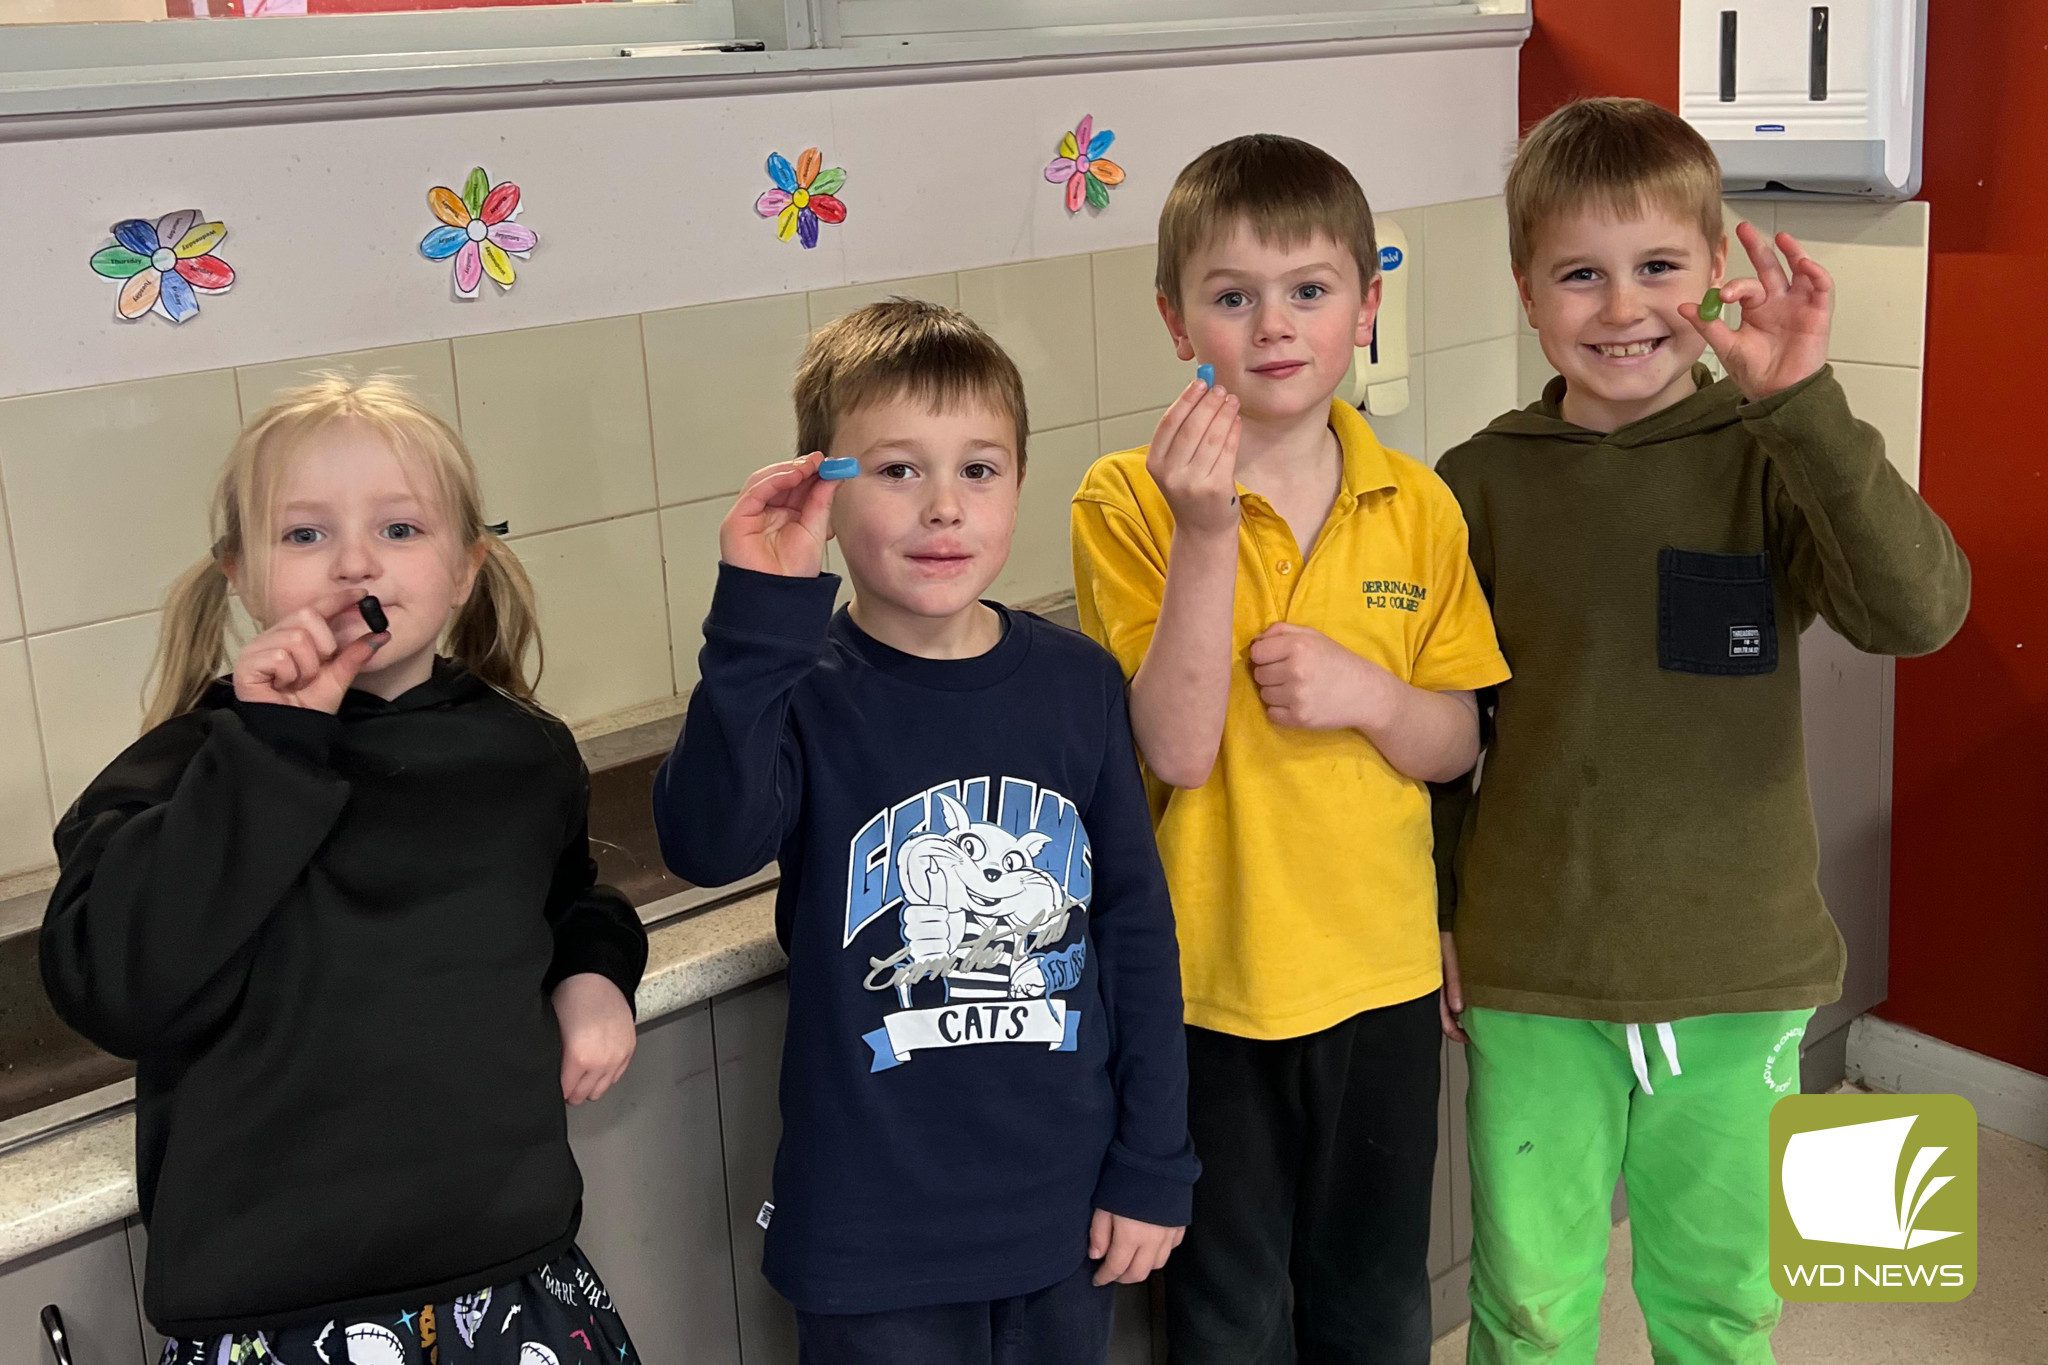 Bright and colourful: Students enjoyed the opportunity to dress up in the colour of their favourite jellybean to mark Jellybean Day last Friday.